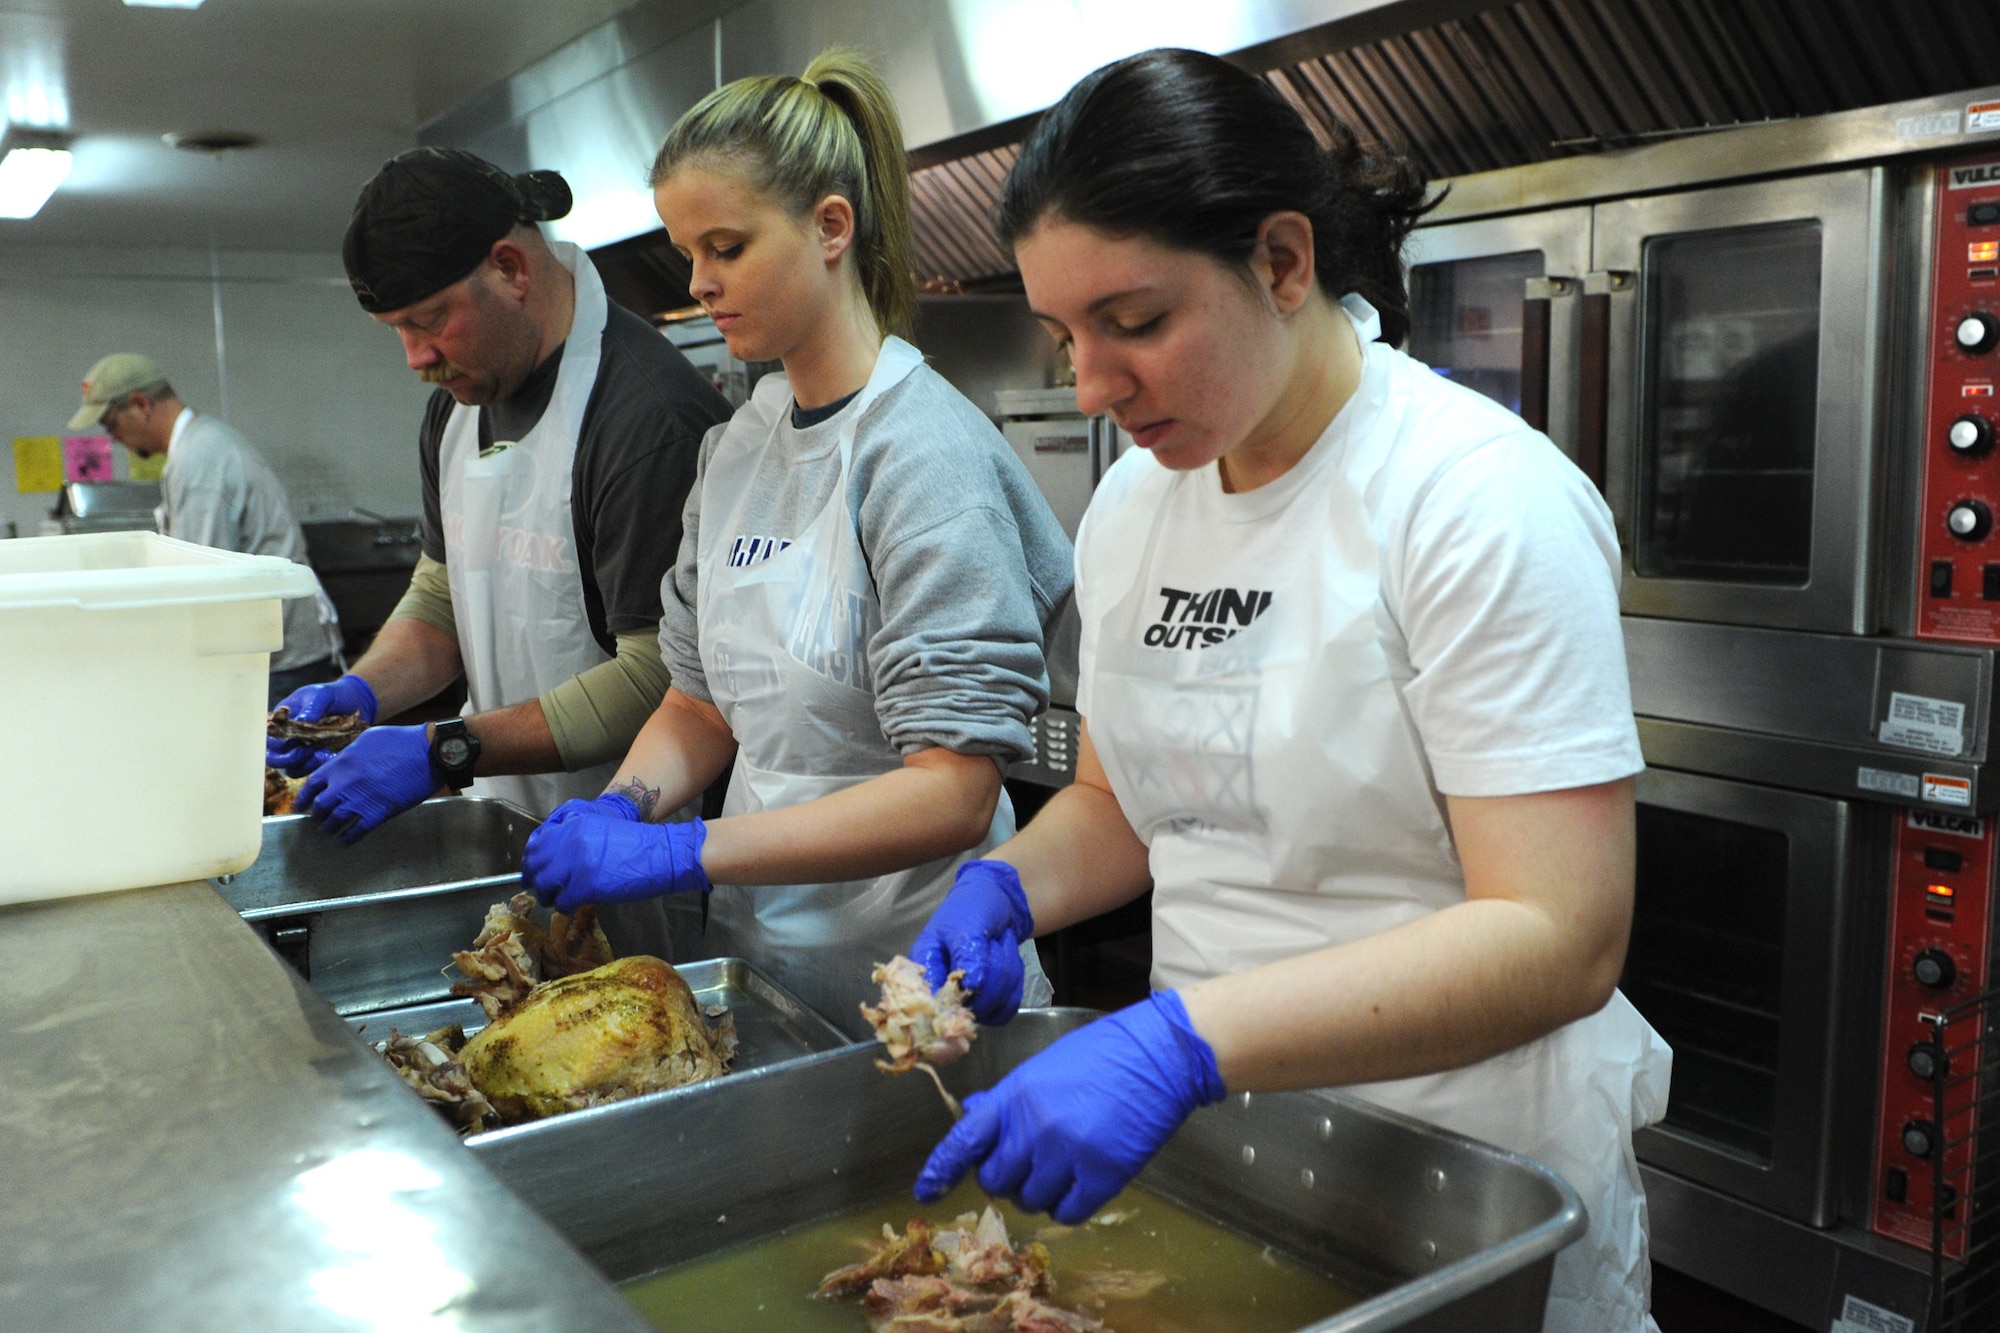 Airmen 1st Class Jessica Brown (center), and Jessica Young, 341st Force Support Squadron force management apprentices, prepare turkey during Operation Thanksgiving at the Great Falls Community Food Bank on Nov. 27. The 341st FSS coordinated the annual event with the food bank to help deliver a record 450 Thanksgiving meals to elderly Great Falls community members. (U.S. Air Force photo/Senior Airman Katrina Heikkinen)